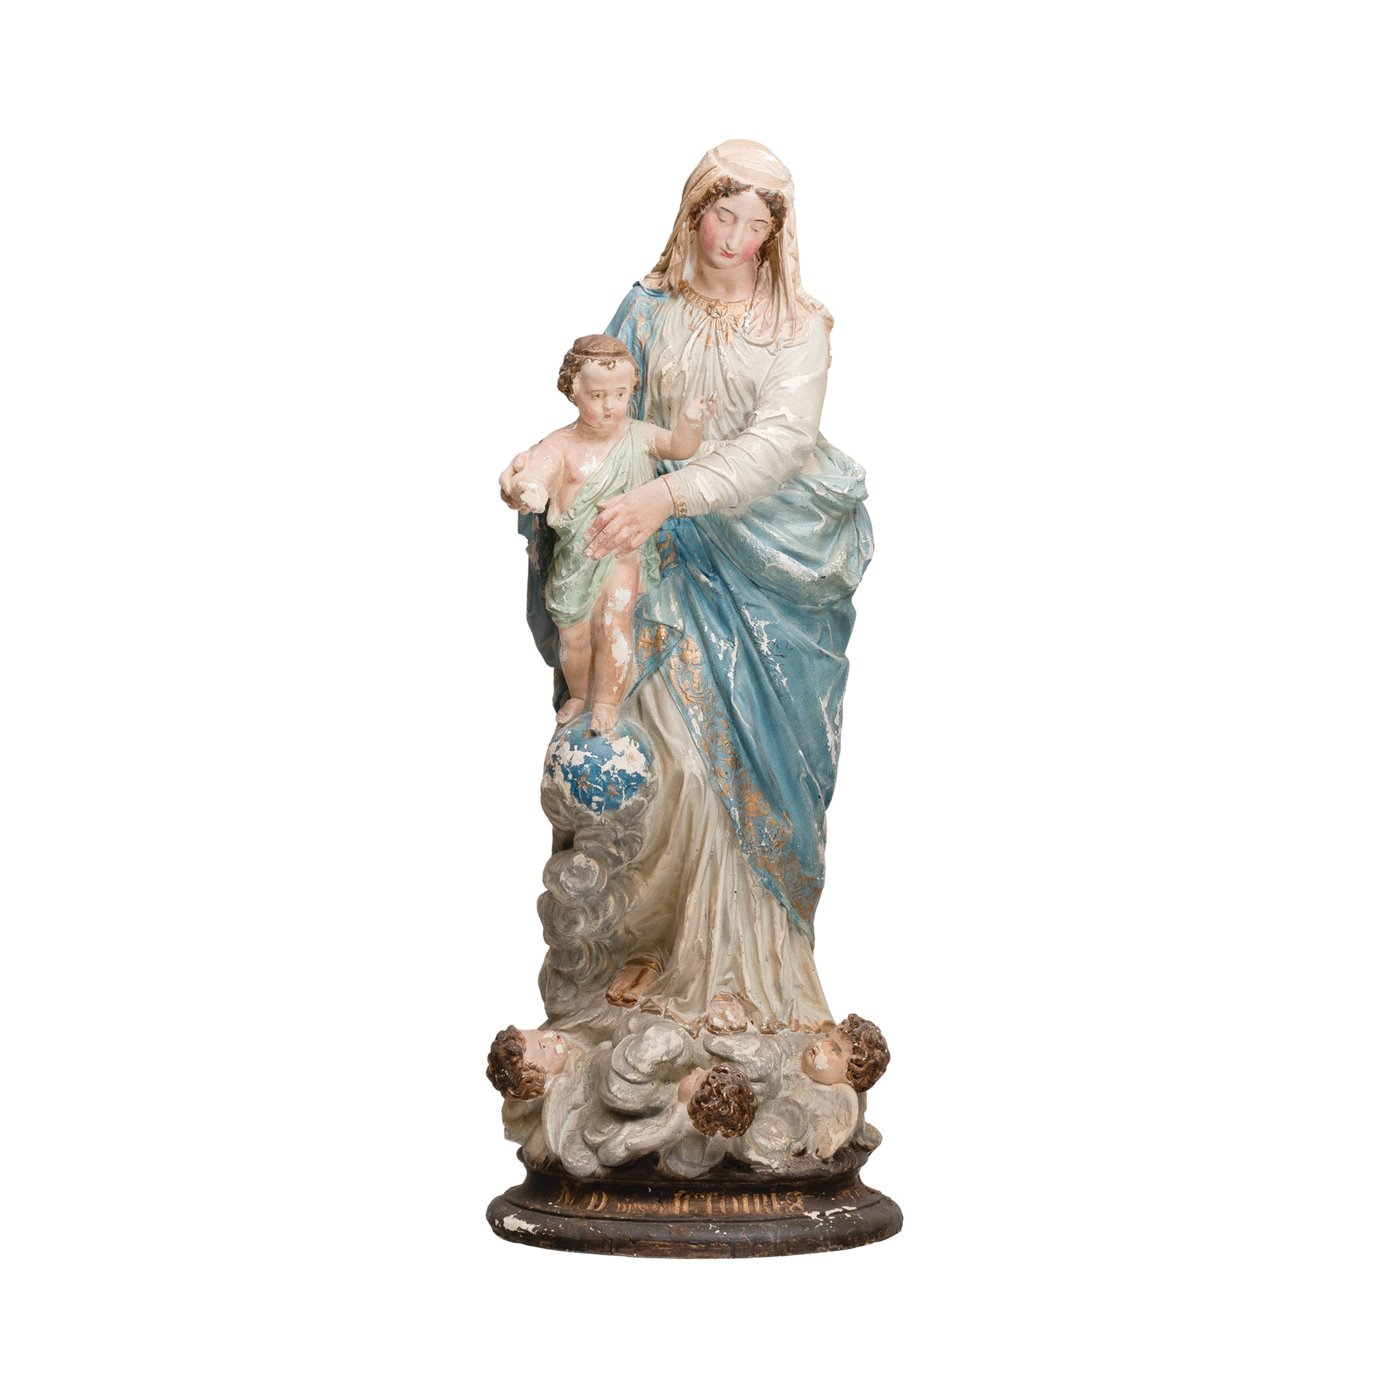 Magnesia Vintage Reproduction Virgin Mary and Child Statue